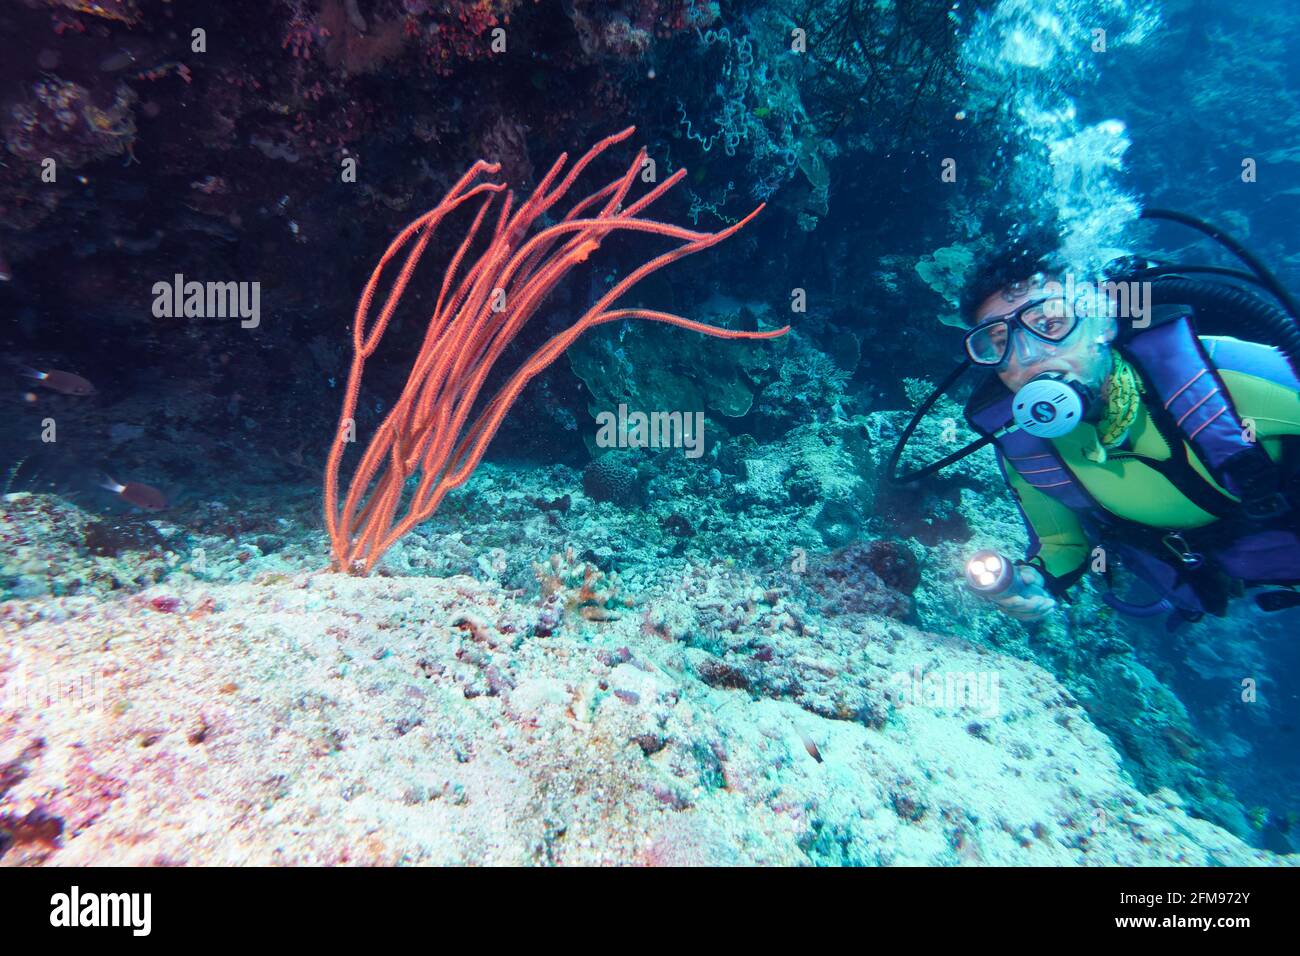 Female Diver Lights Ands Looks At Red Whip Corals. Selayar South Sulawesi Indonesia Stock Photo